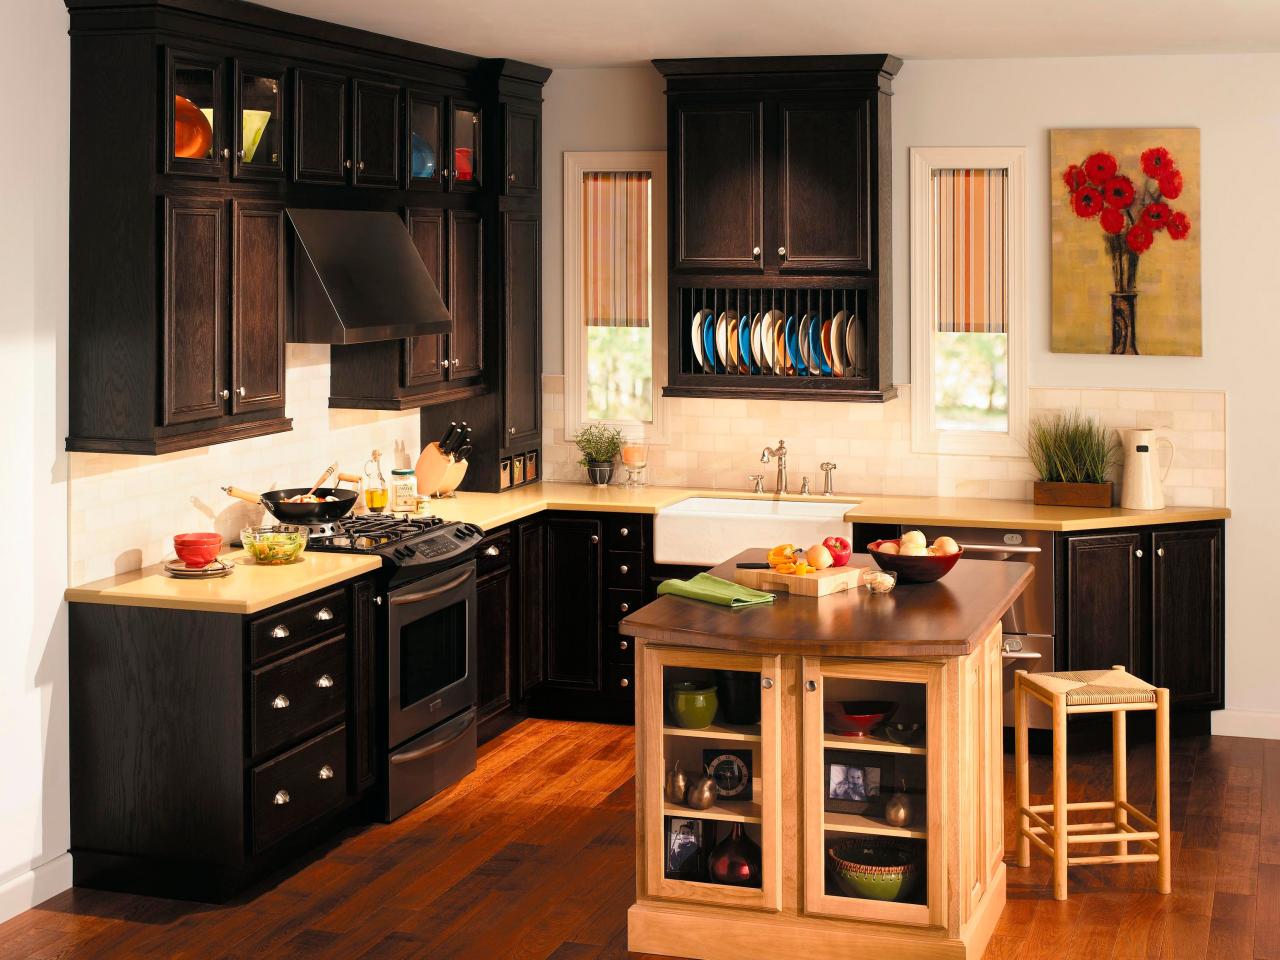 Cabinet Types Which Is Best For You, Who Makes The Best Quality Kitchen Cabinets